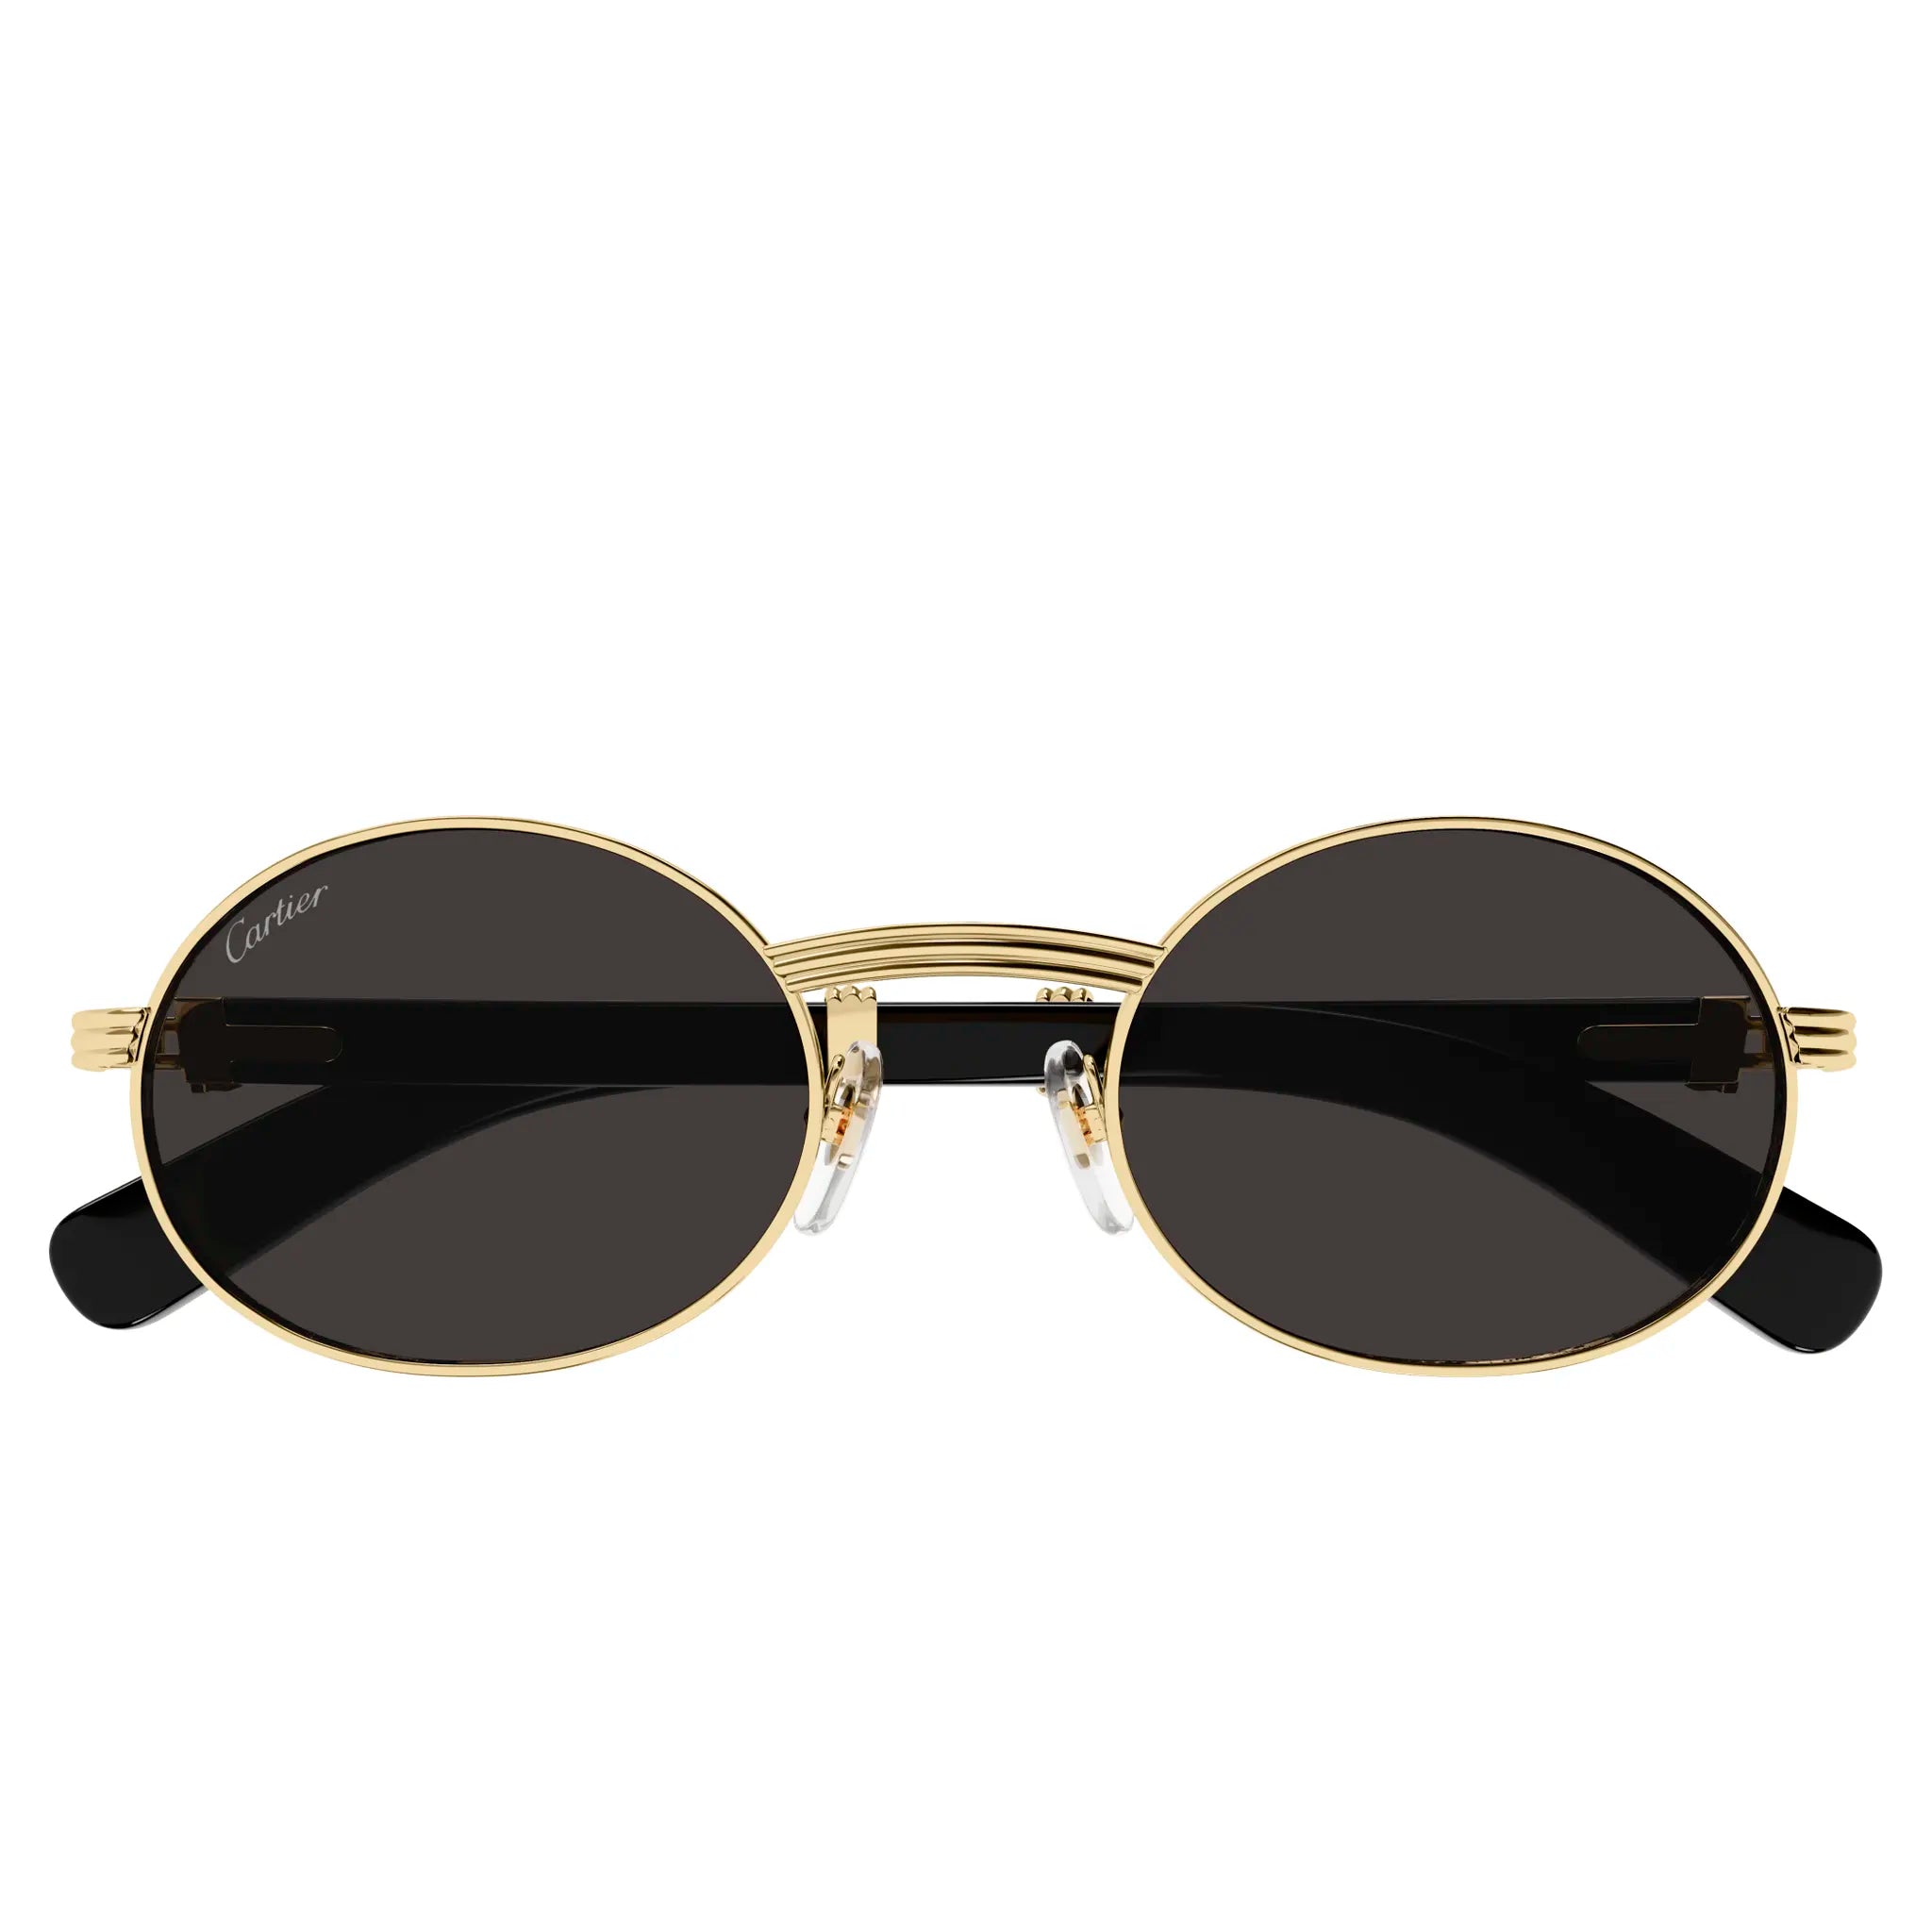 Folded view of Cartier Eyewear CT0464S-001 Gold Grey Sunglasses